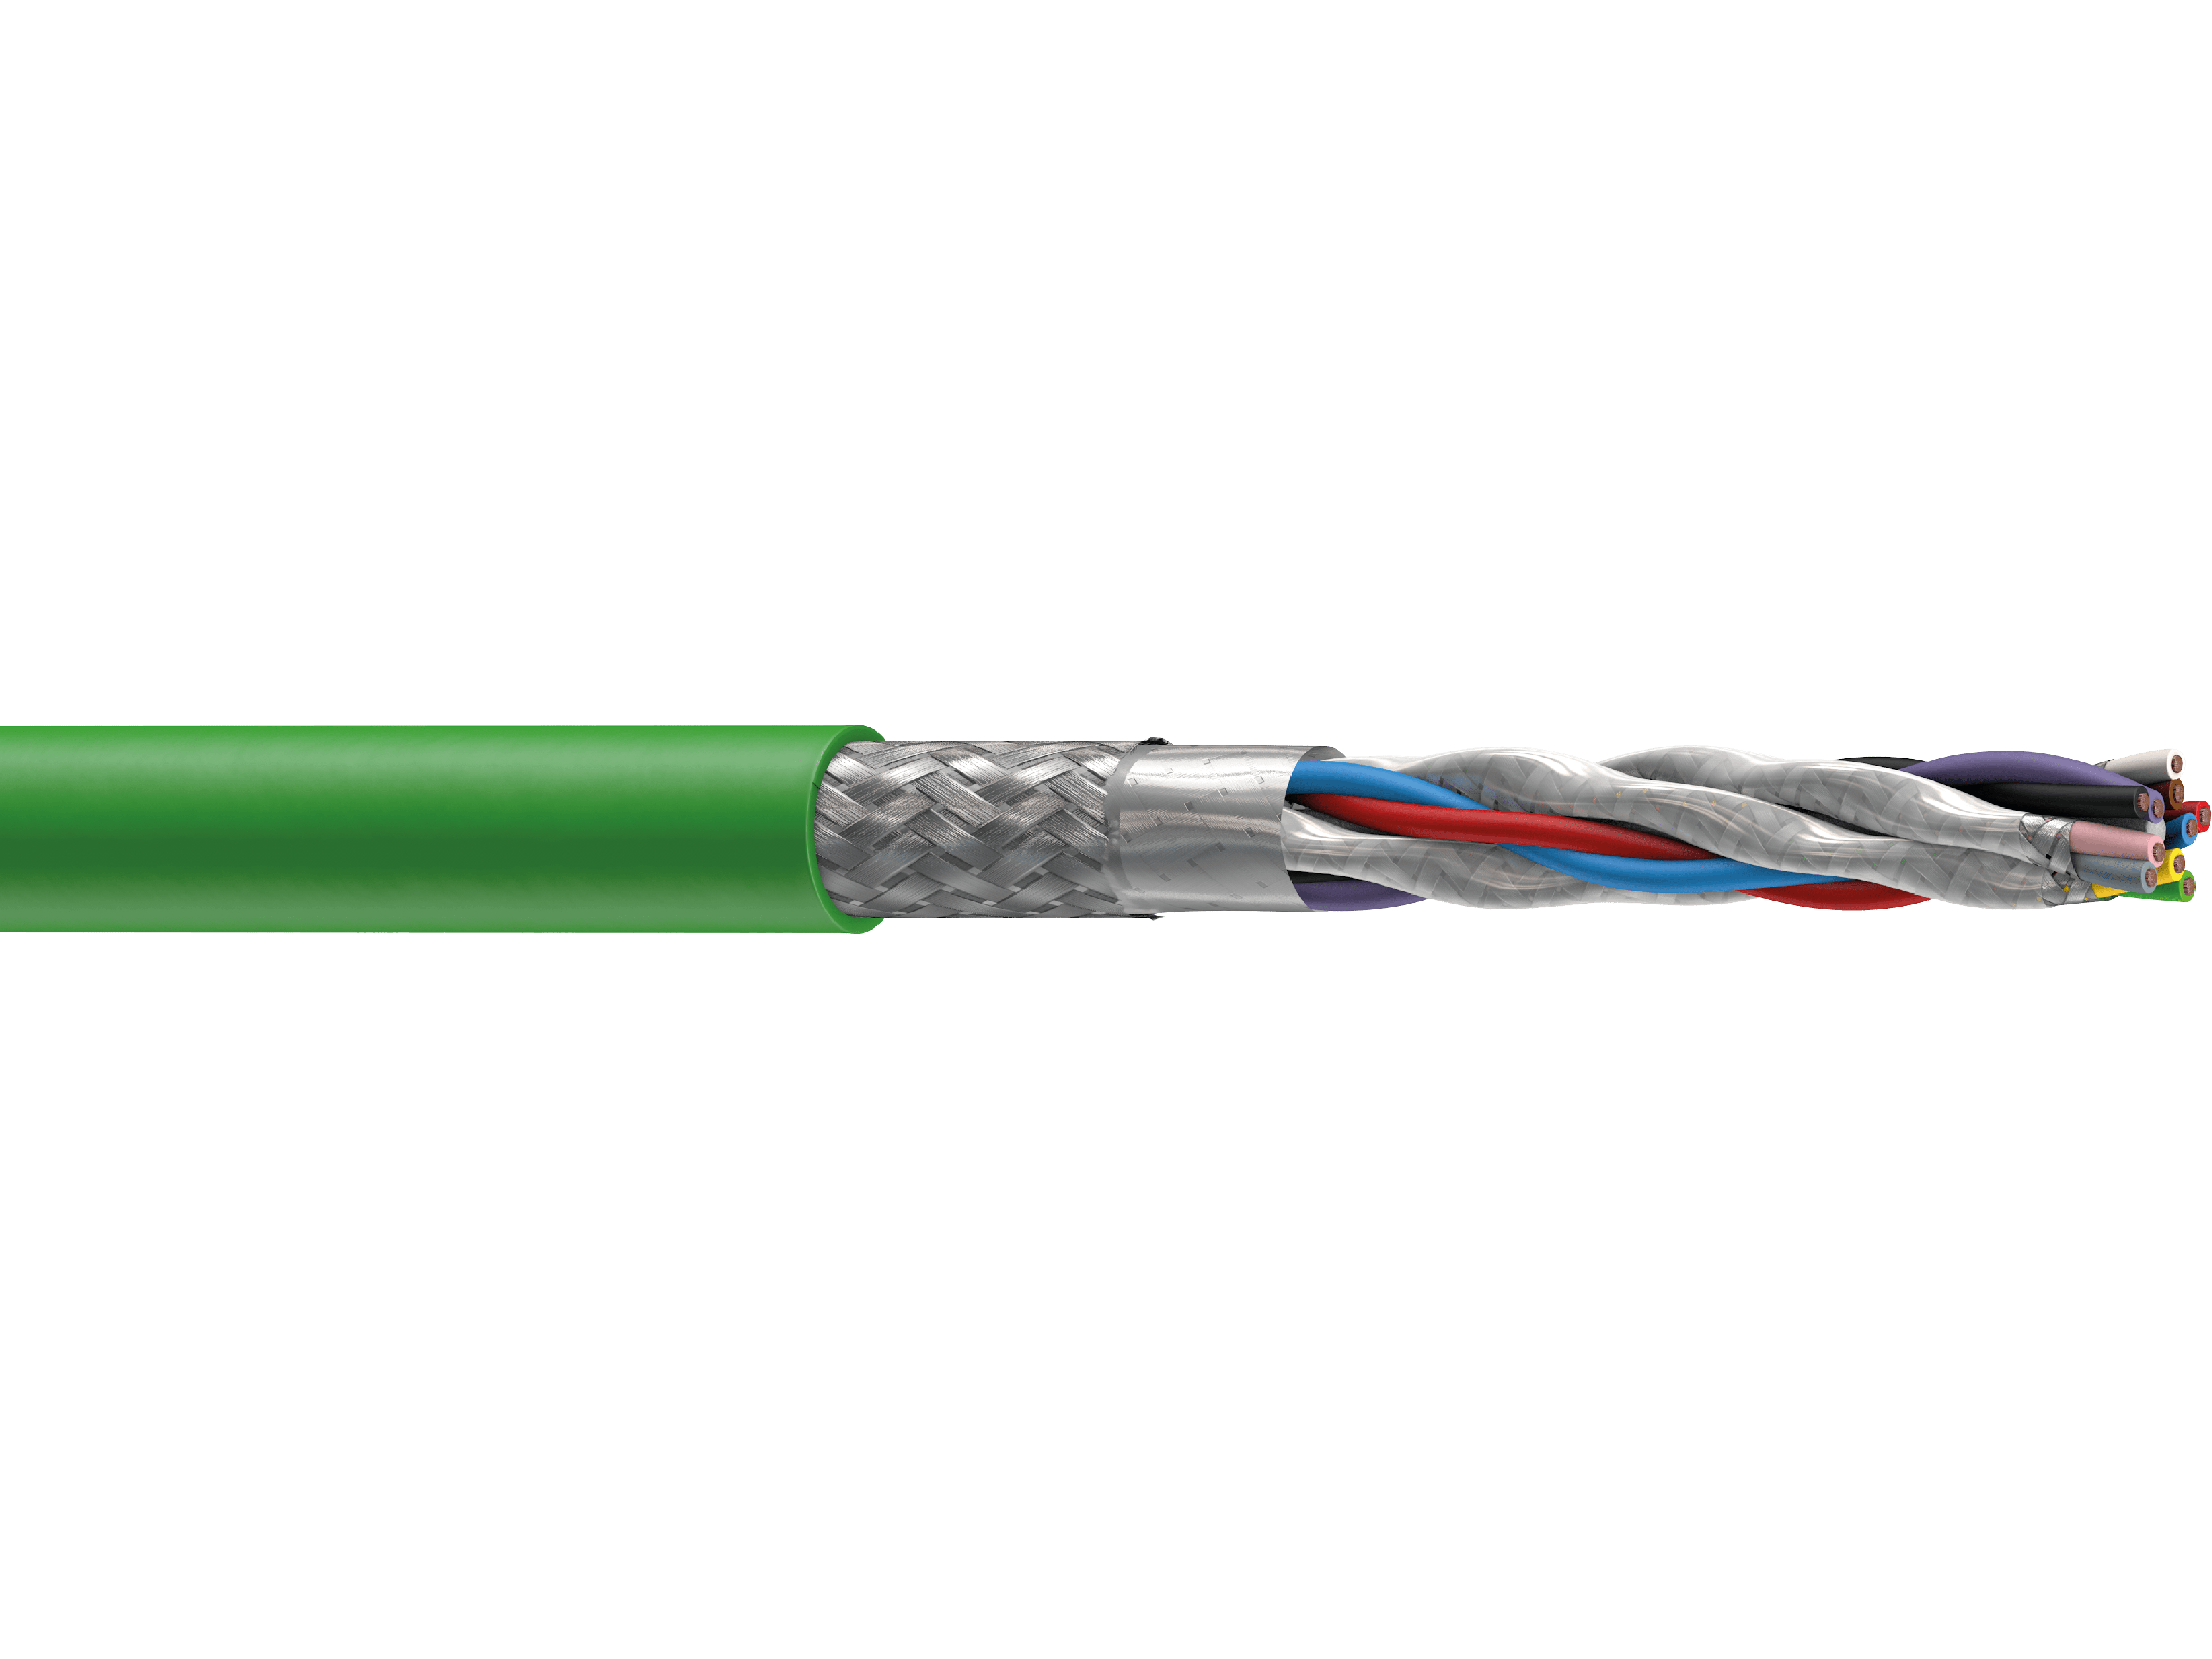 Measuring system cables